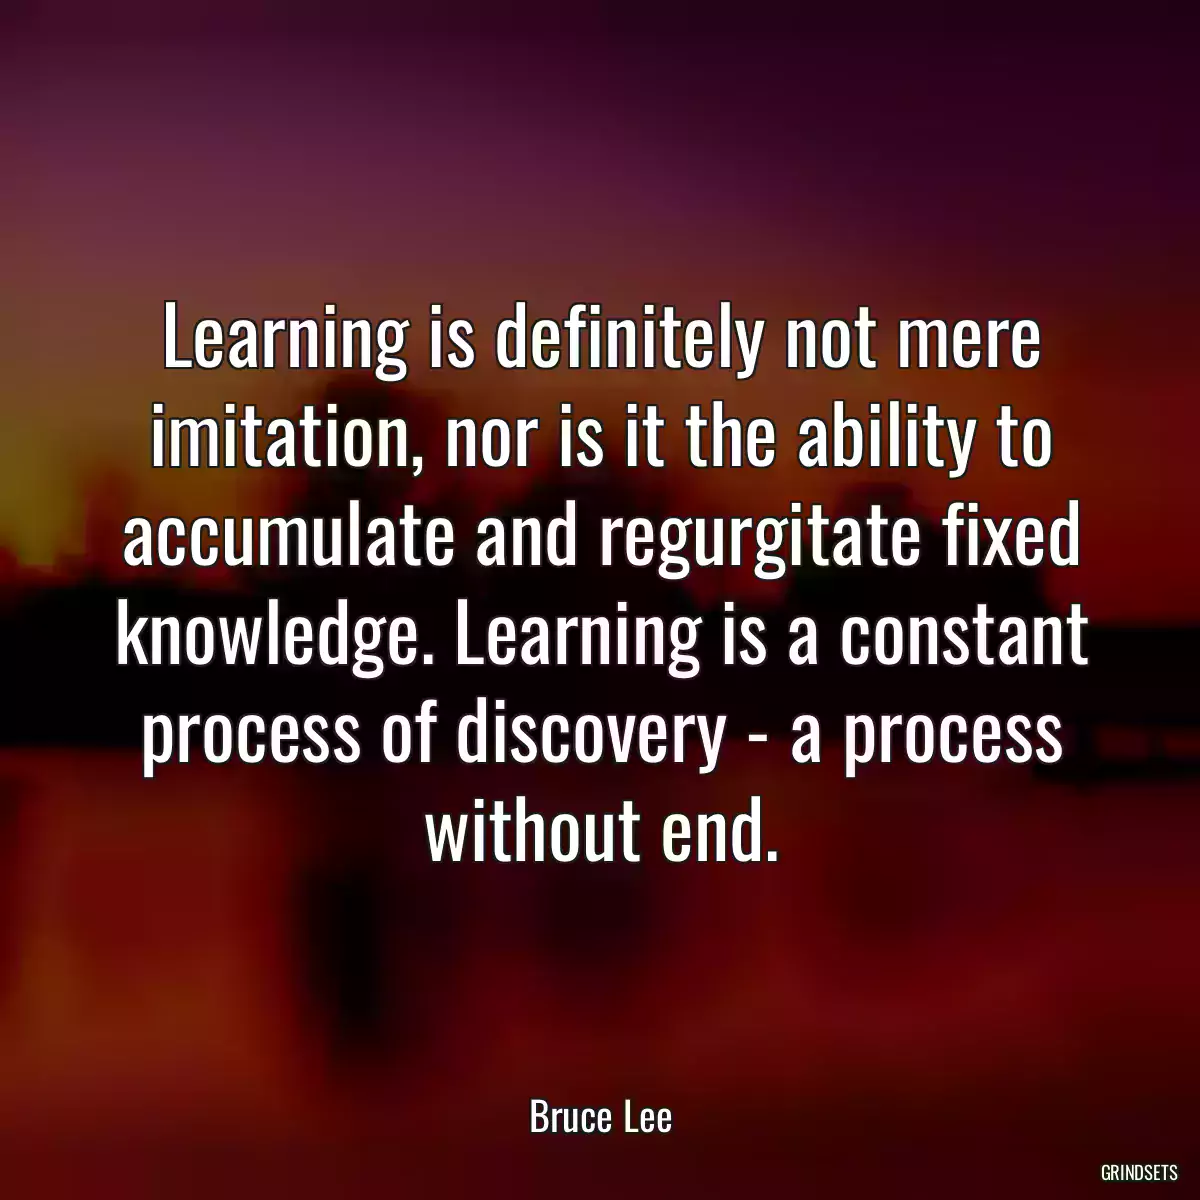 Learning is definitely not mere imitation, nor is it the ability to accumulate and regurgitate fixed knowledge. Learning is a constant process of discovery - a process without end.